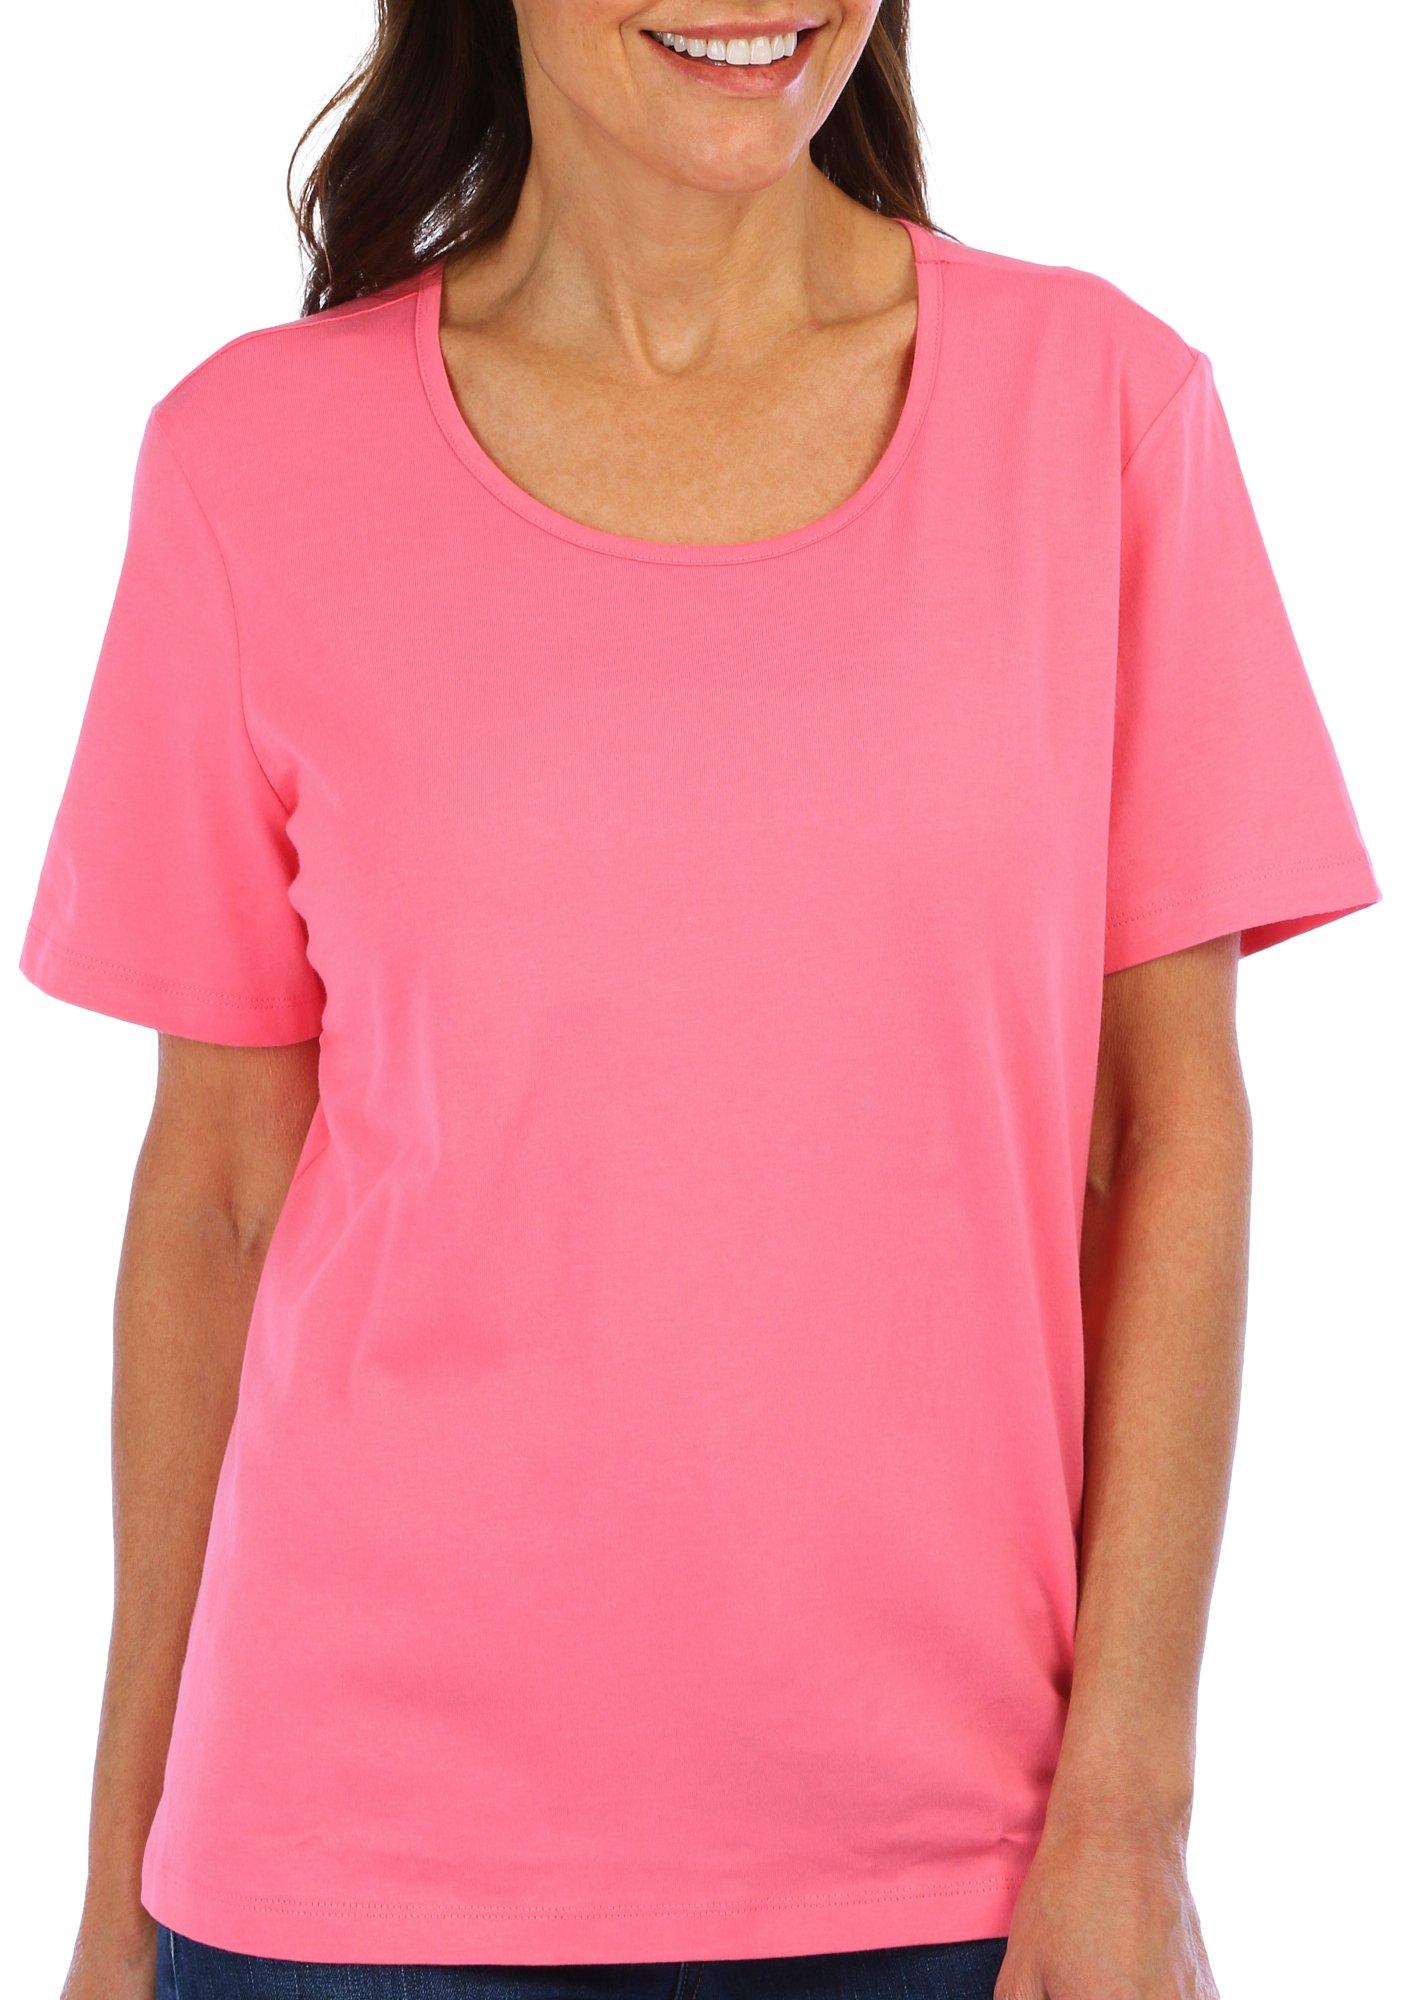 Coral Bay Petite Solid Jewel Band Short Sleeve Top